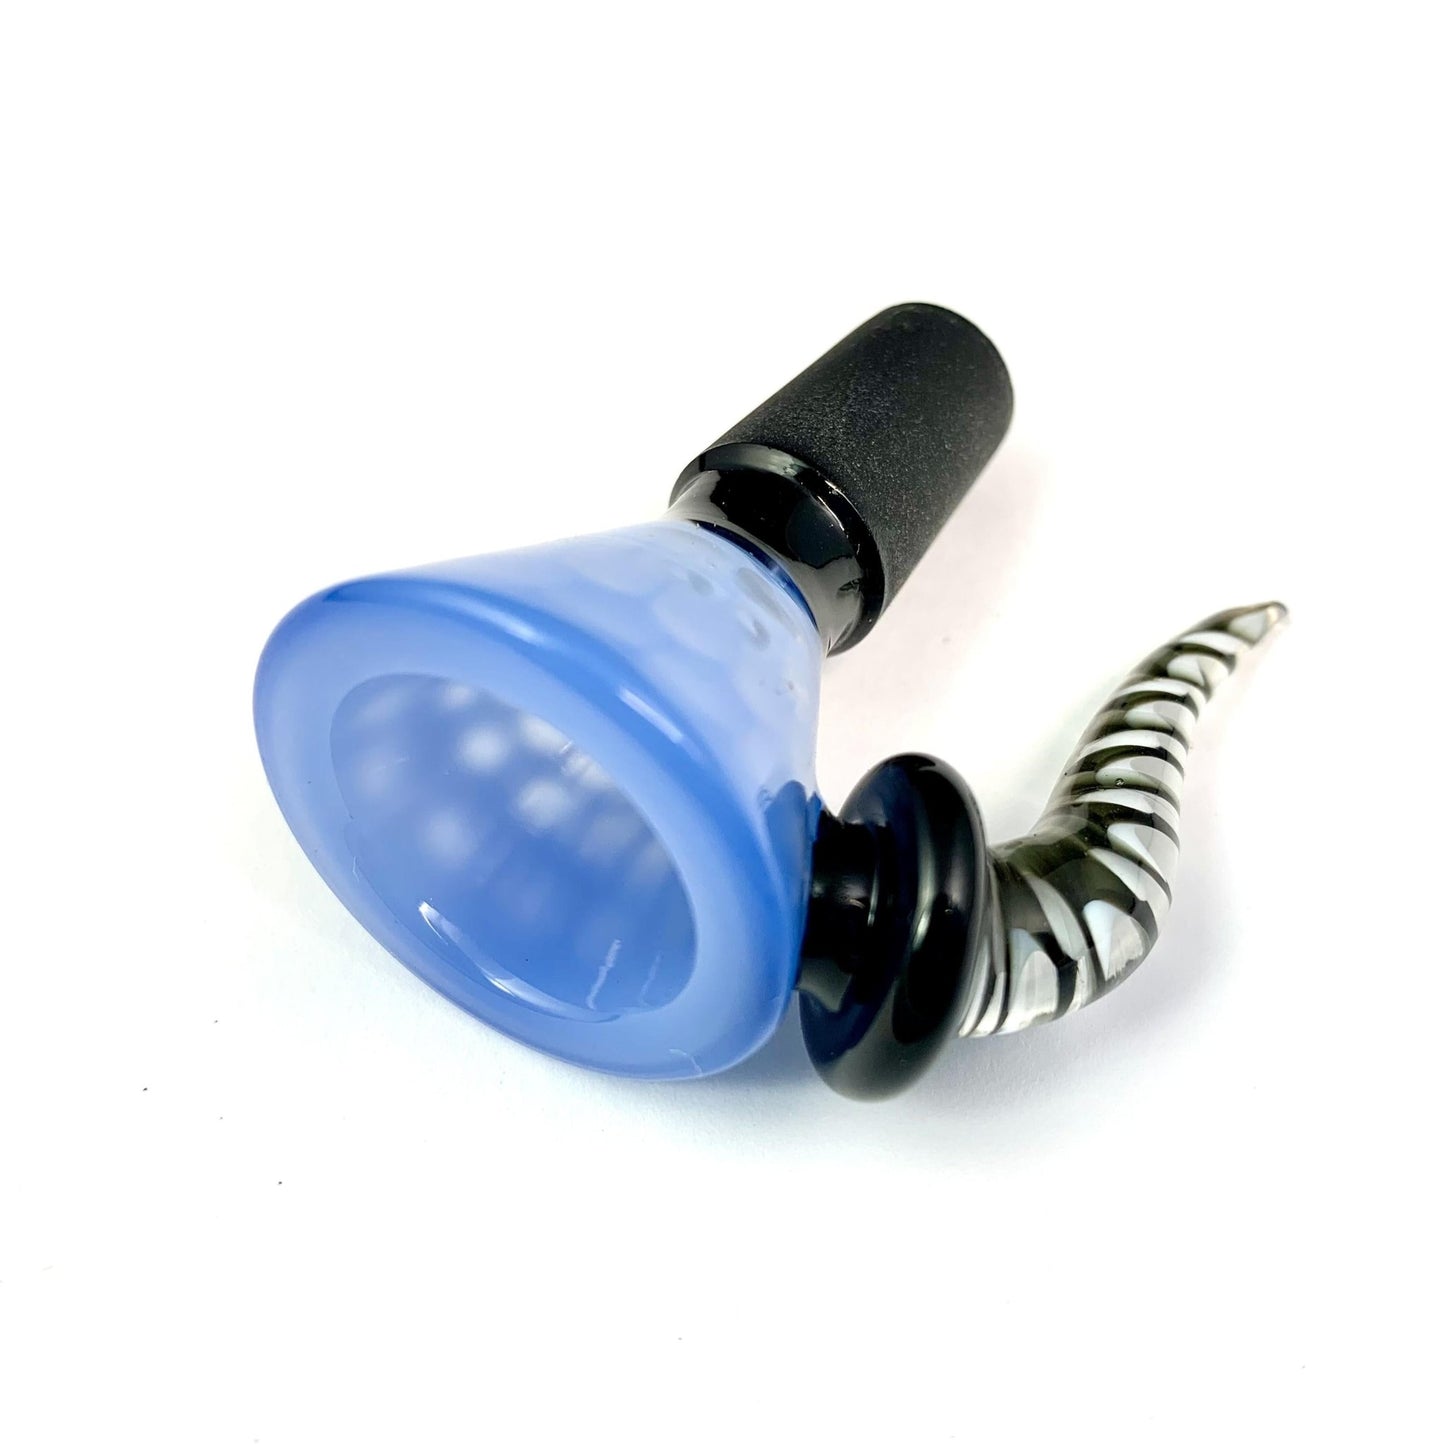 14mm Blue Rams Horn Cone Piece Male - The Bong Baron